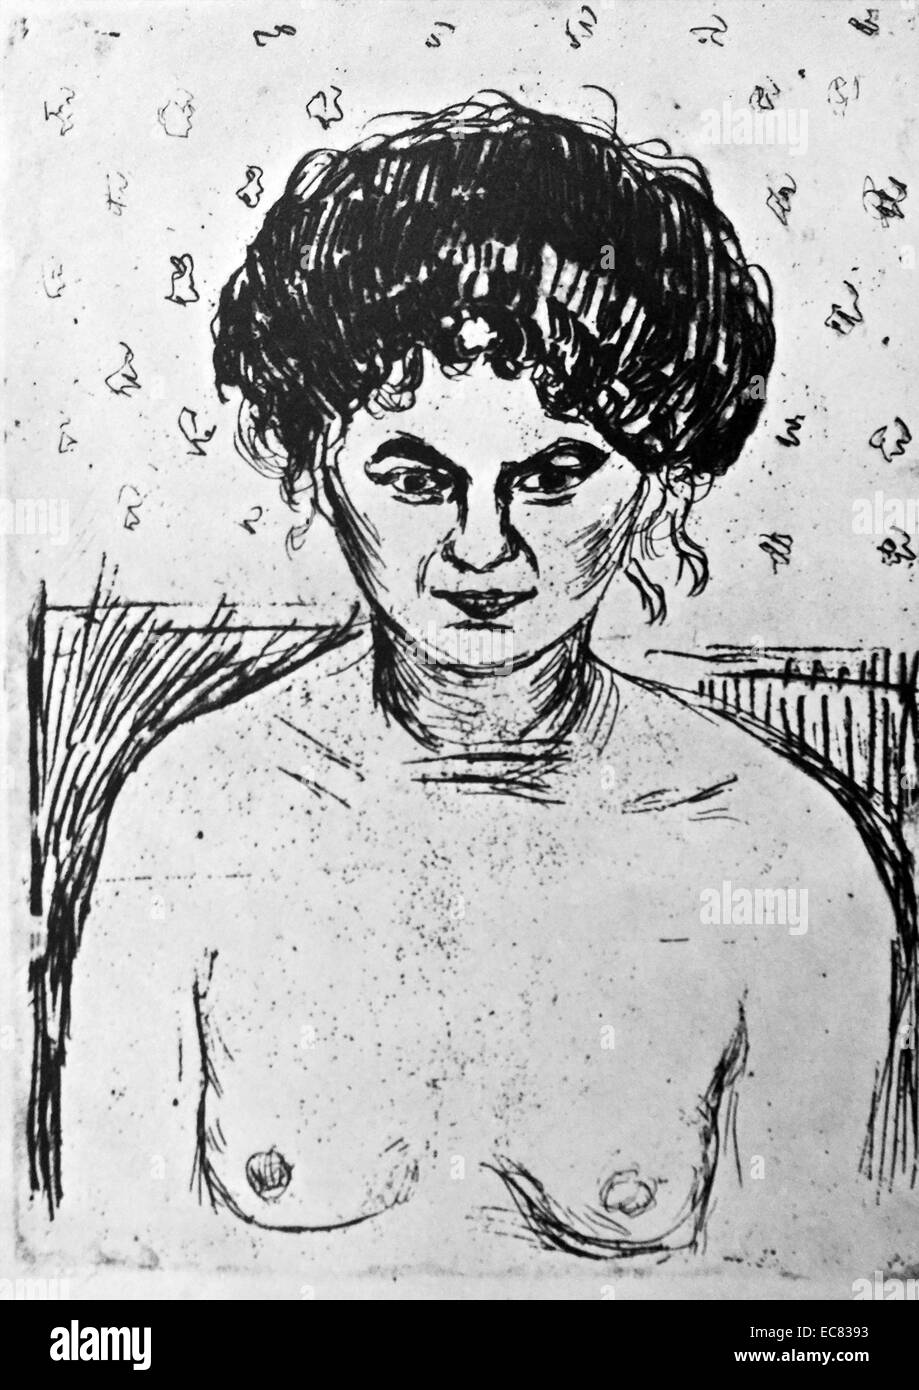 Portrait entitled Female Art by the Norwegian artist Edvard Munch (1863-1944). This work was produced in 1904. Stock Photo